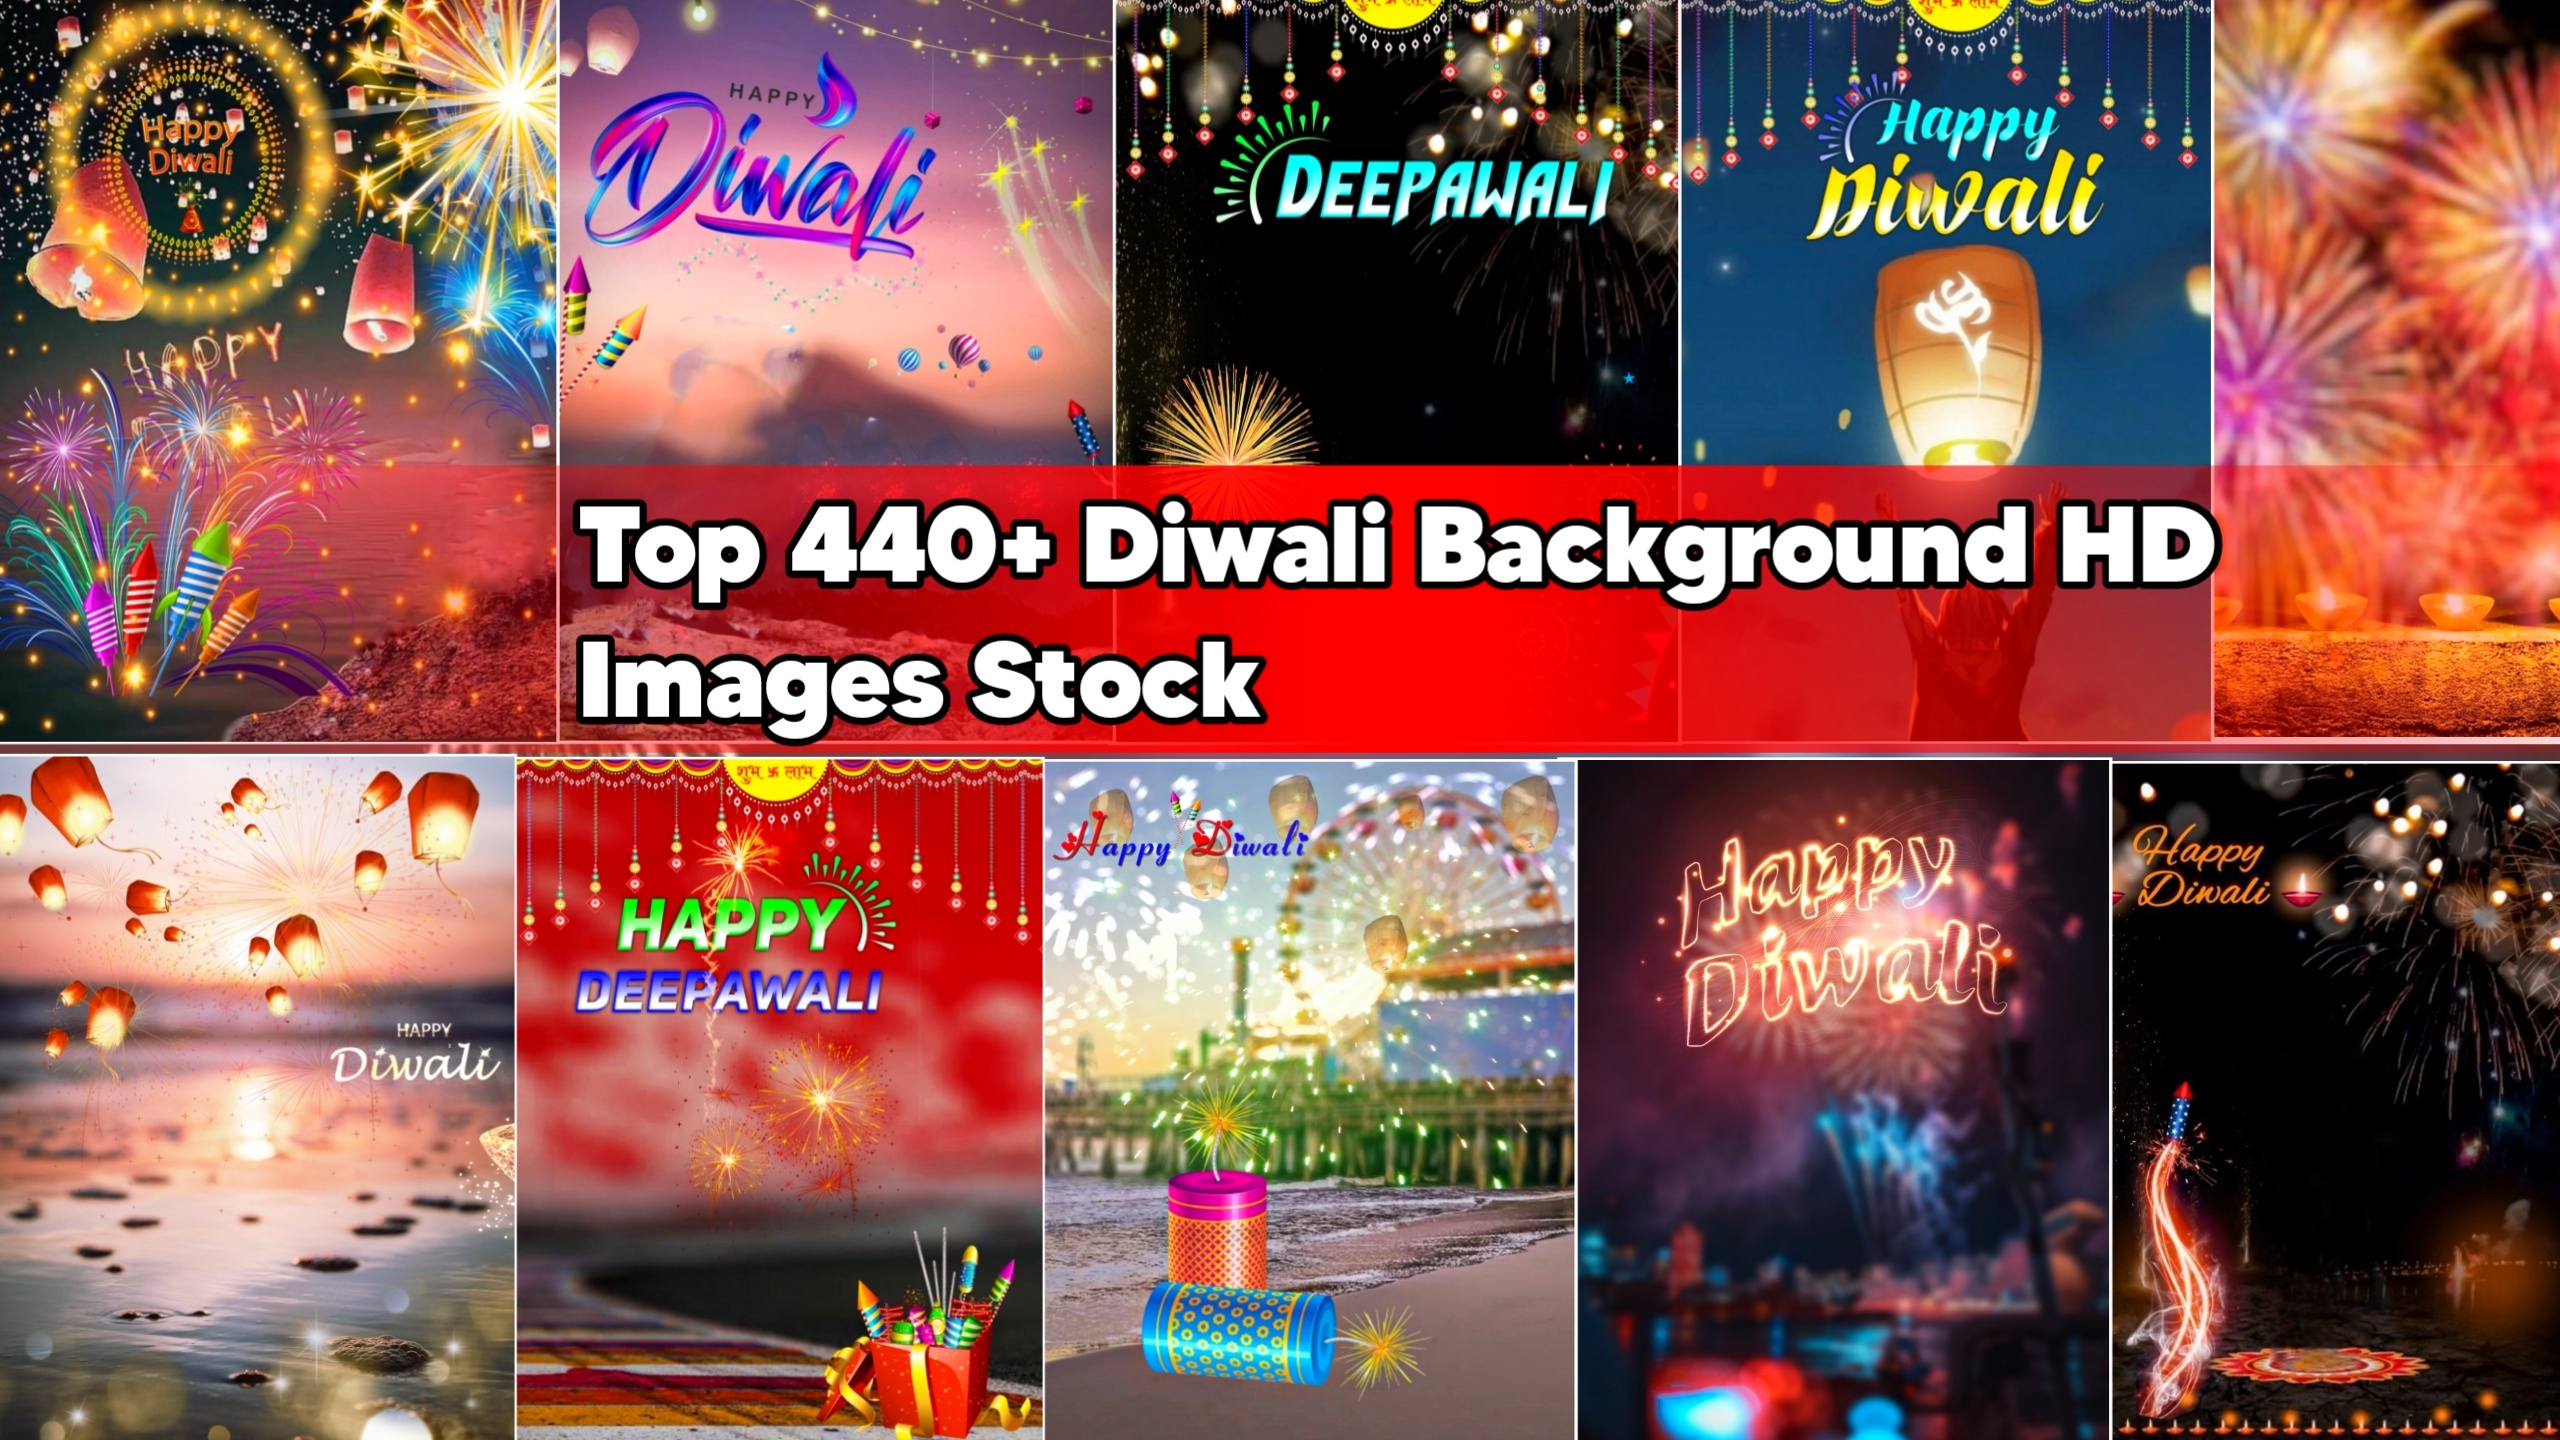 Top 440+ Diwali Background HD Images Stock